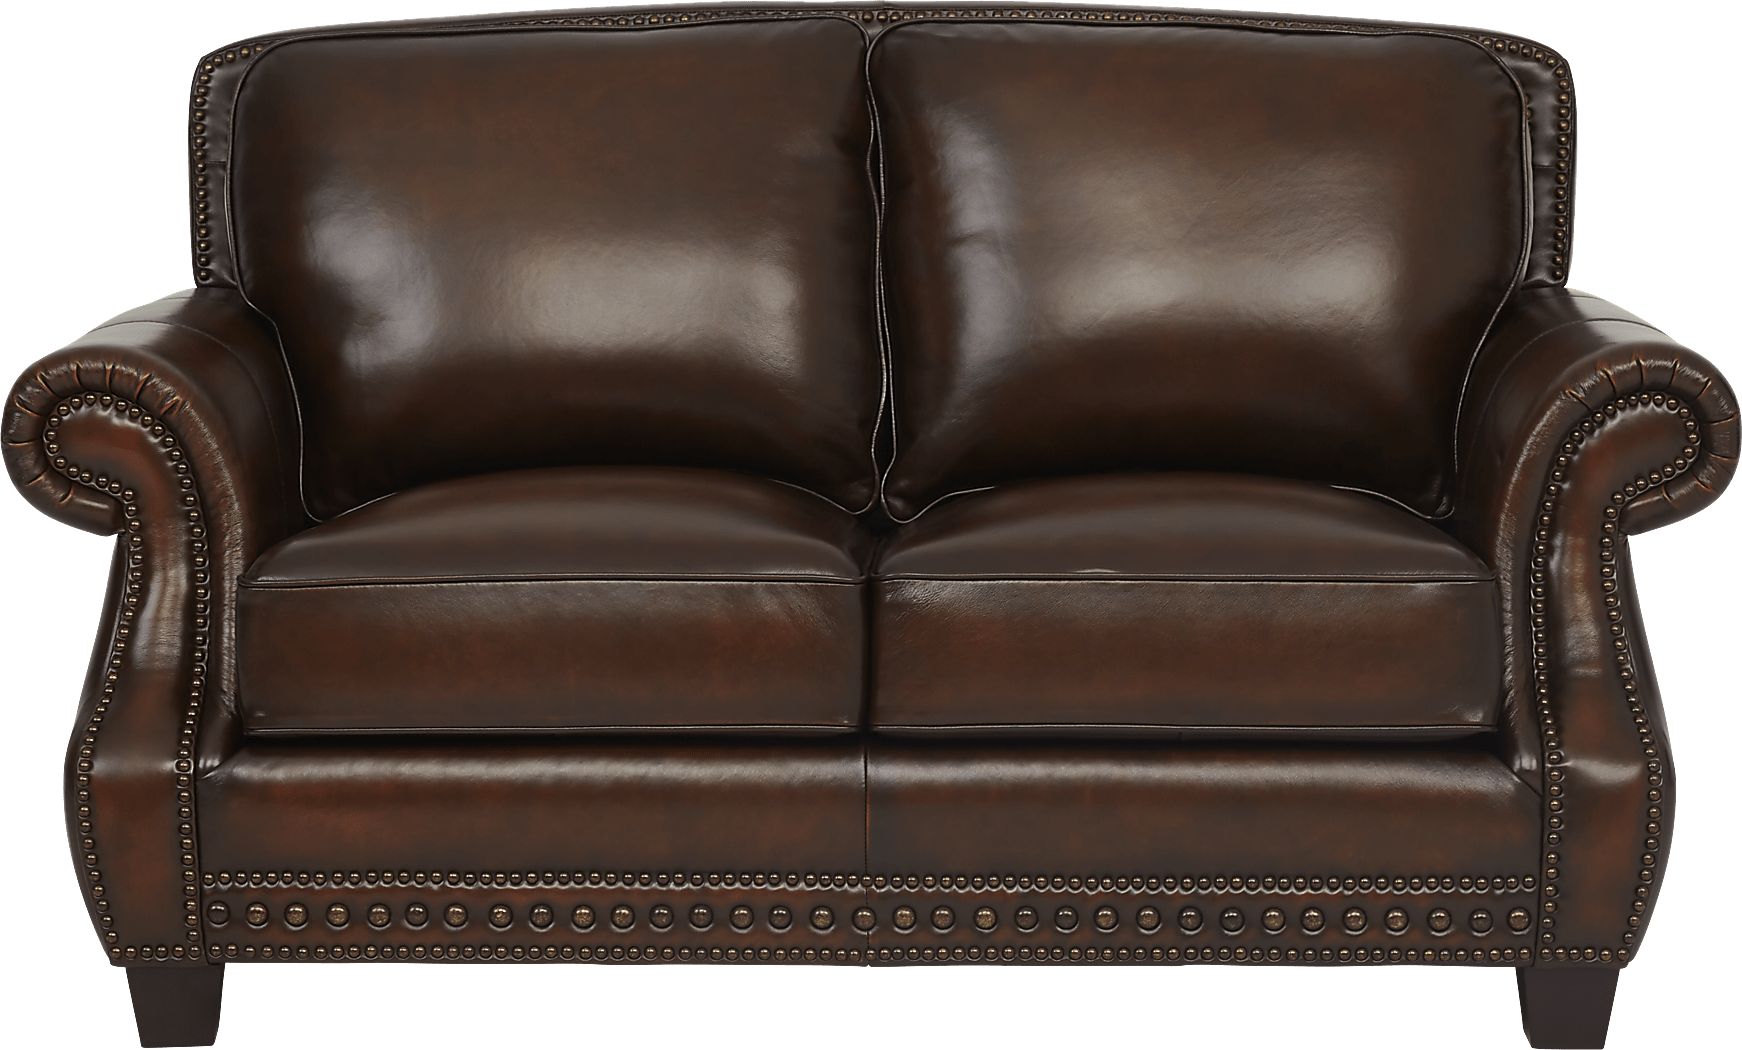 Cindy Crawford Home Calvano Brown Leather 3 Pc Living Room